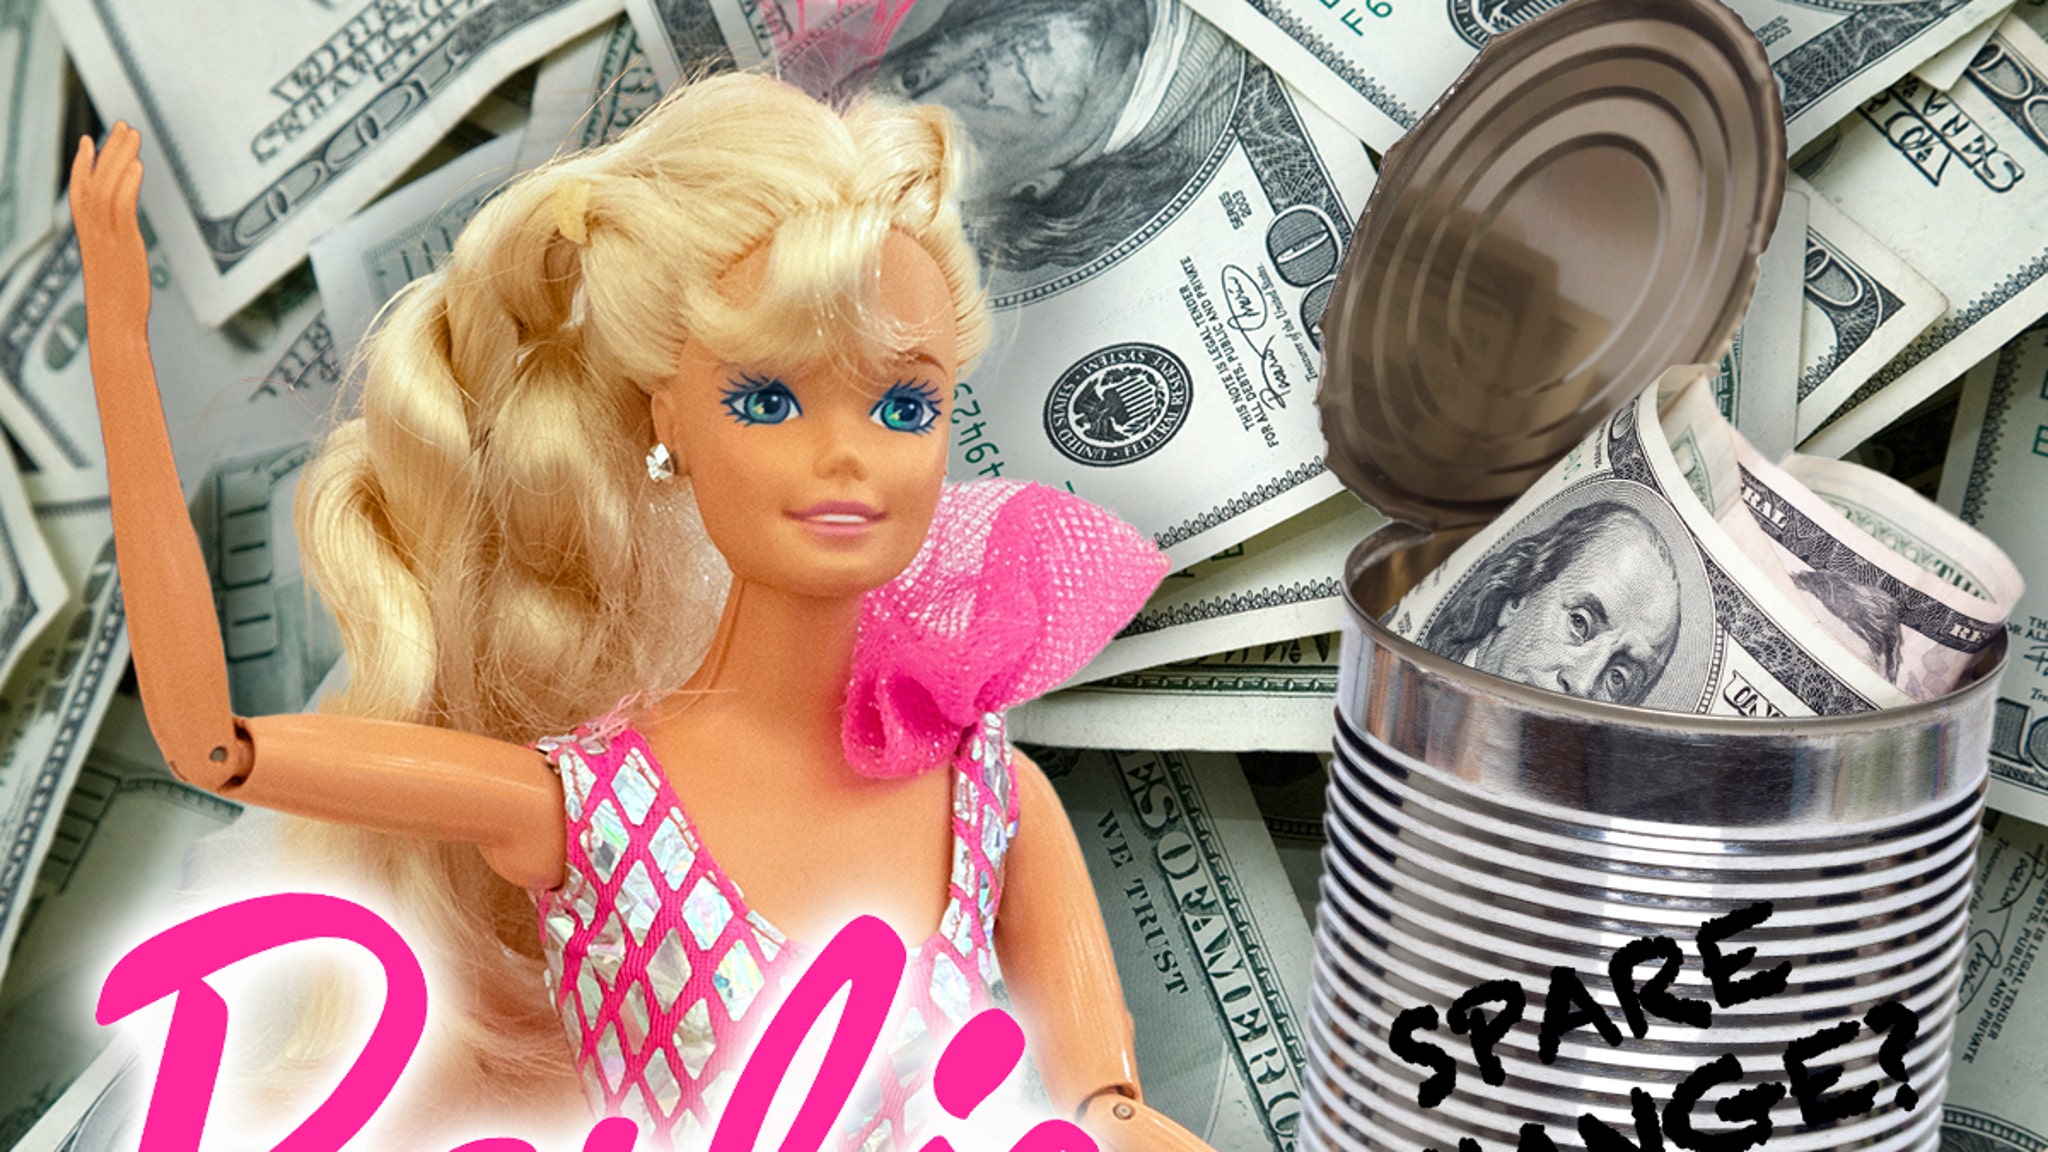 Debate over Barbie classism prompts fans to decry the doll as cheap